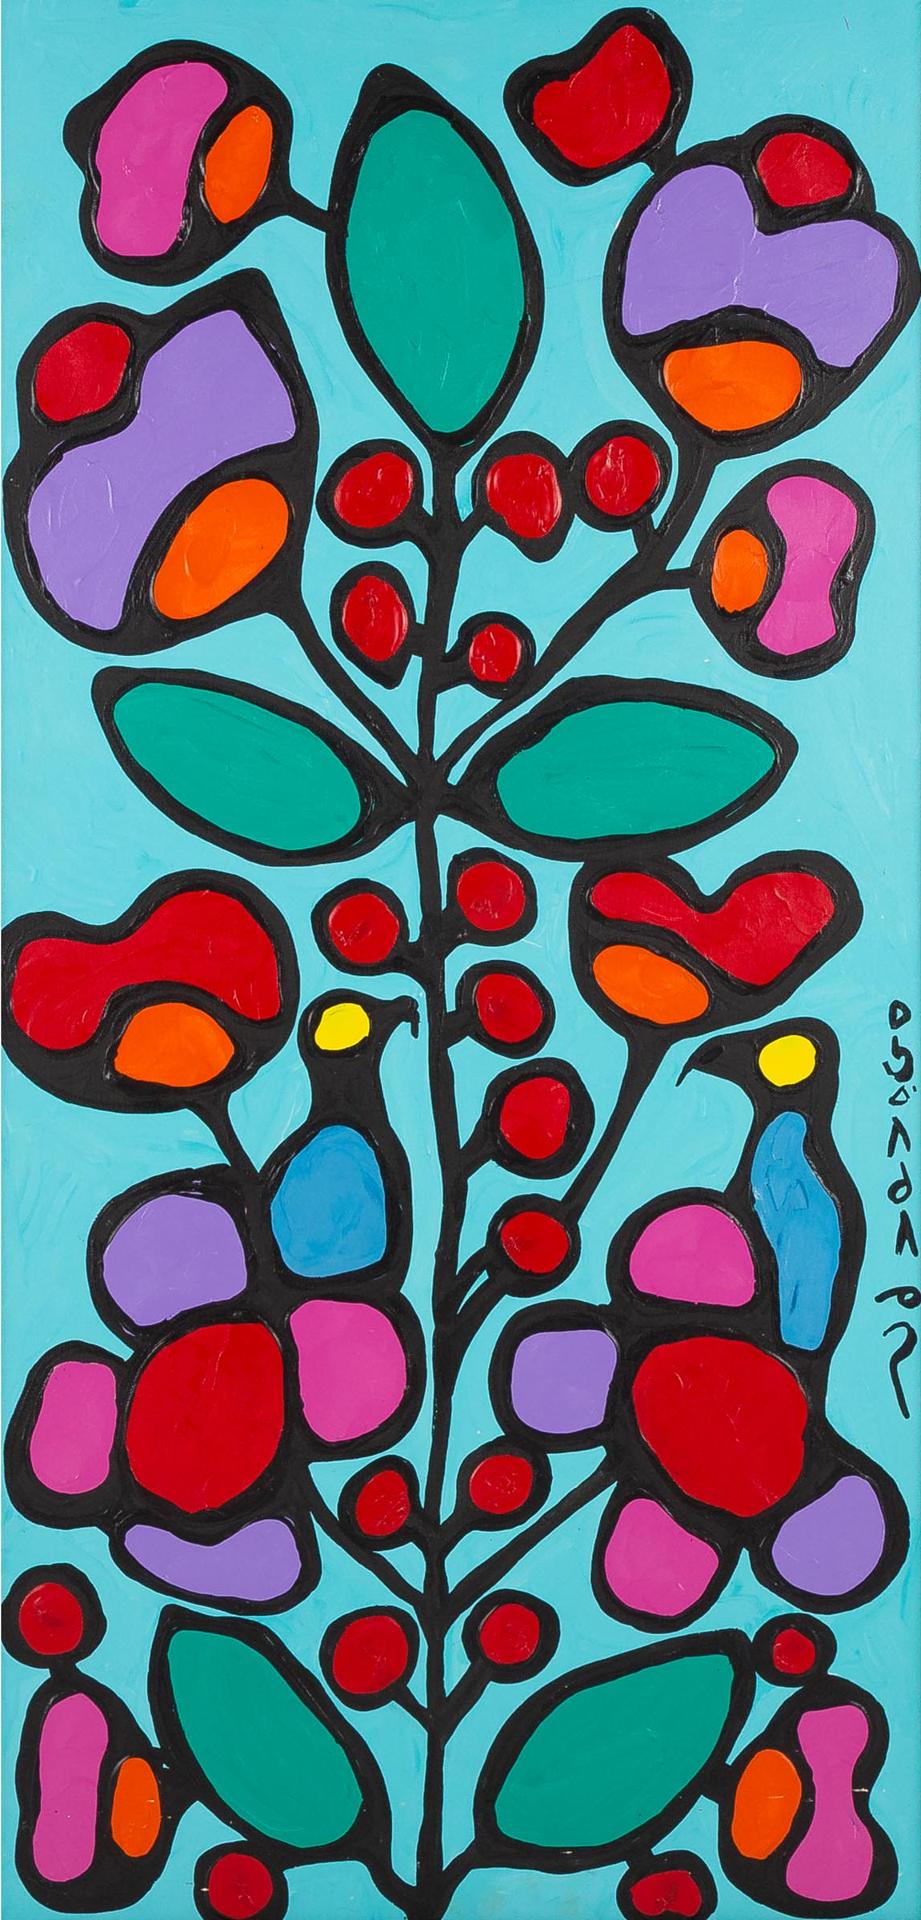 Norval H. Morrisseau (1931-2007) - Tree With Birds